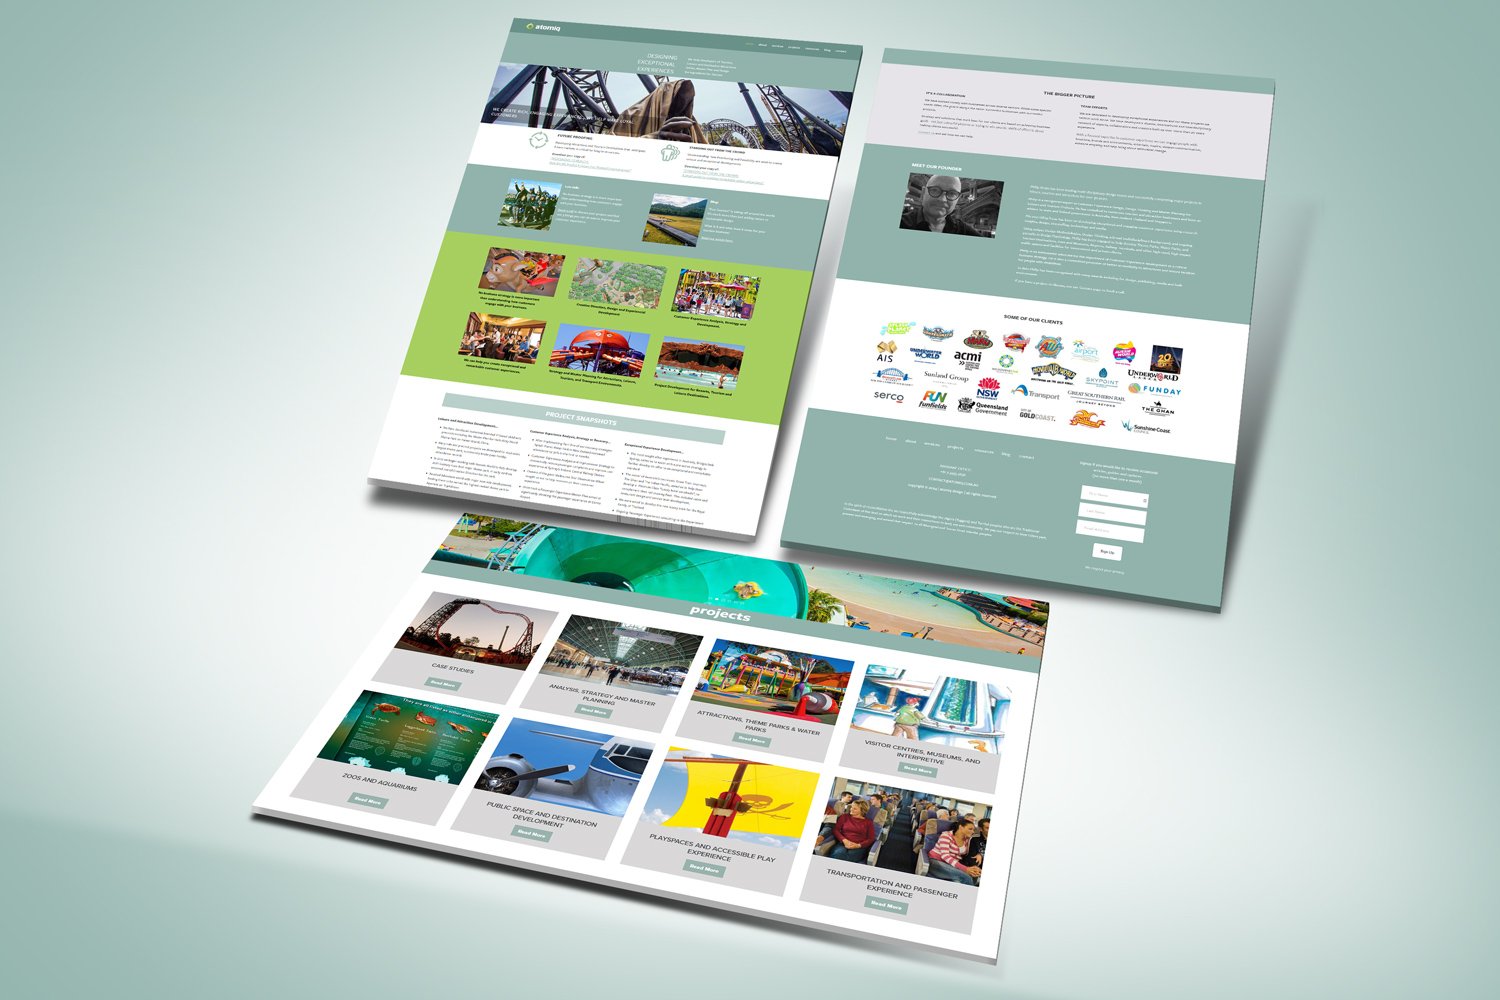 Showcasing our web design for Atomiq that works across a range of sectors including attractions, leisure, tourism, transport, and government advisory, with clients who rely on delivering exceptional experiences to their customers. Check them out! #We